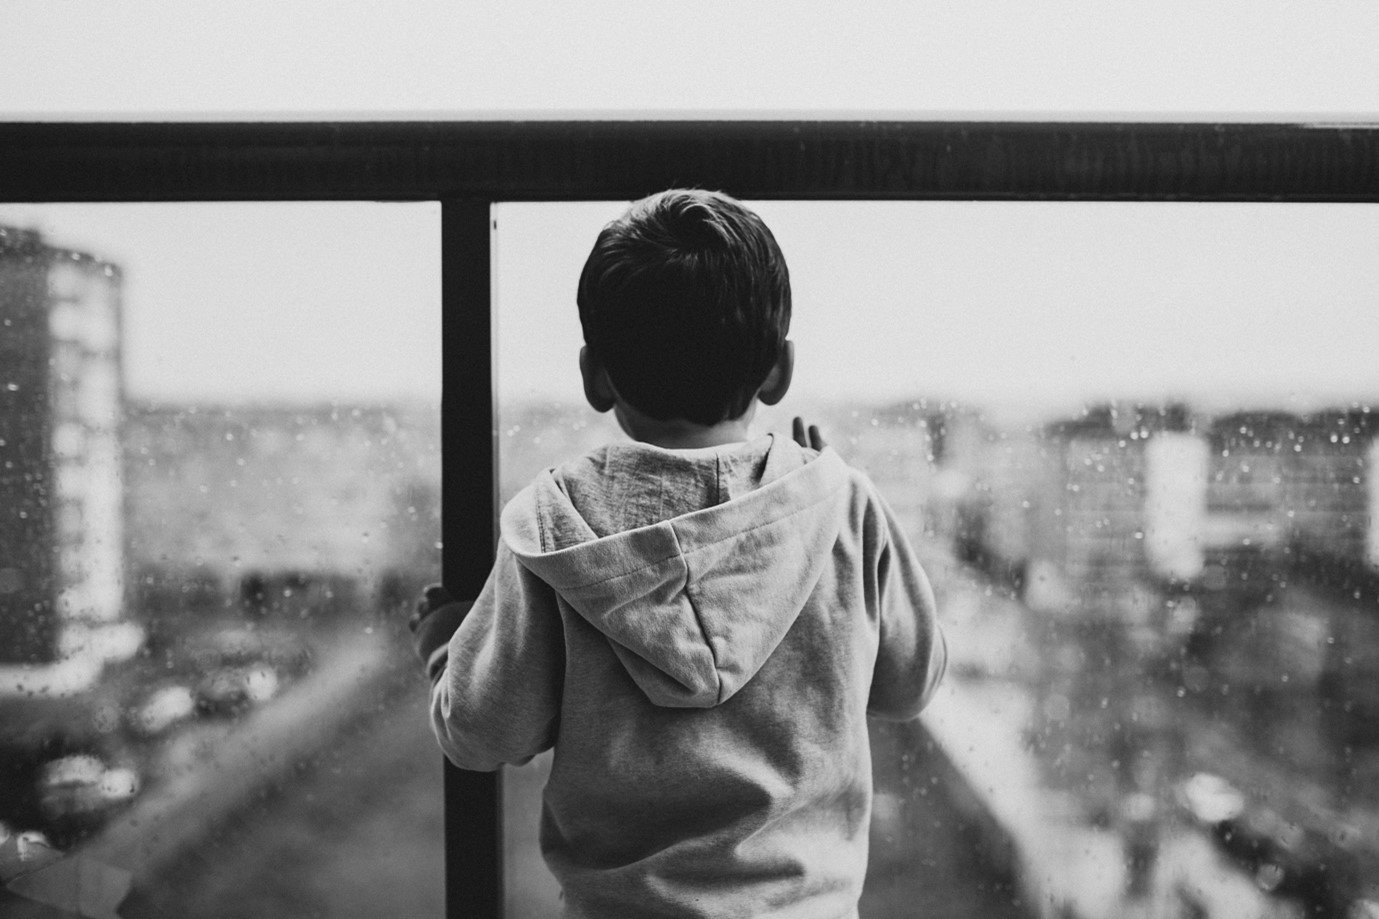 a black and white image of a young boy on a balcony overlooking a city